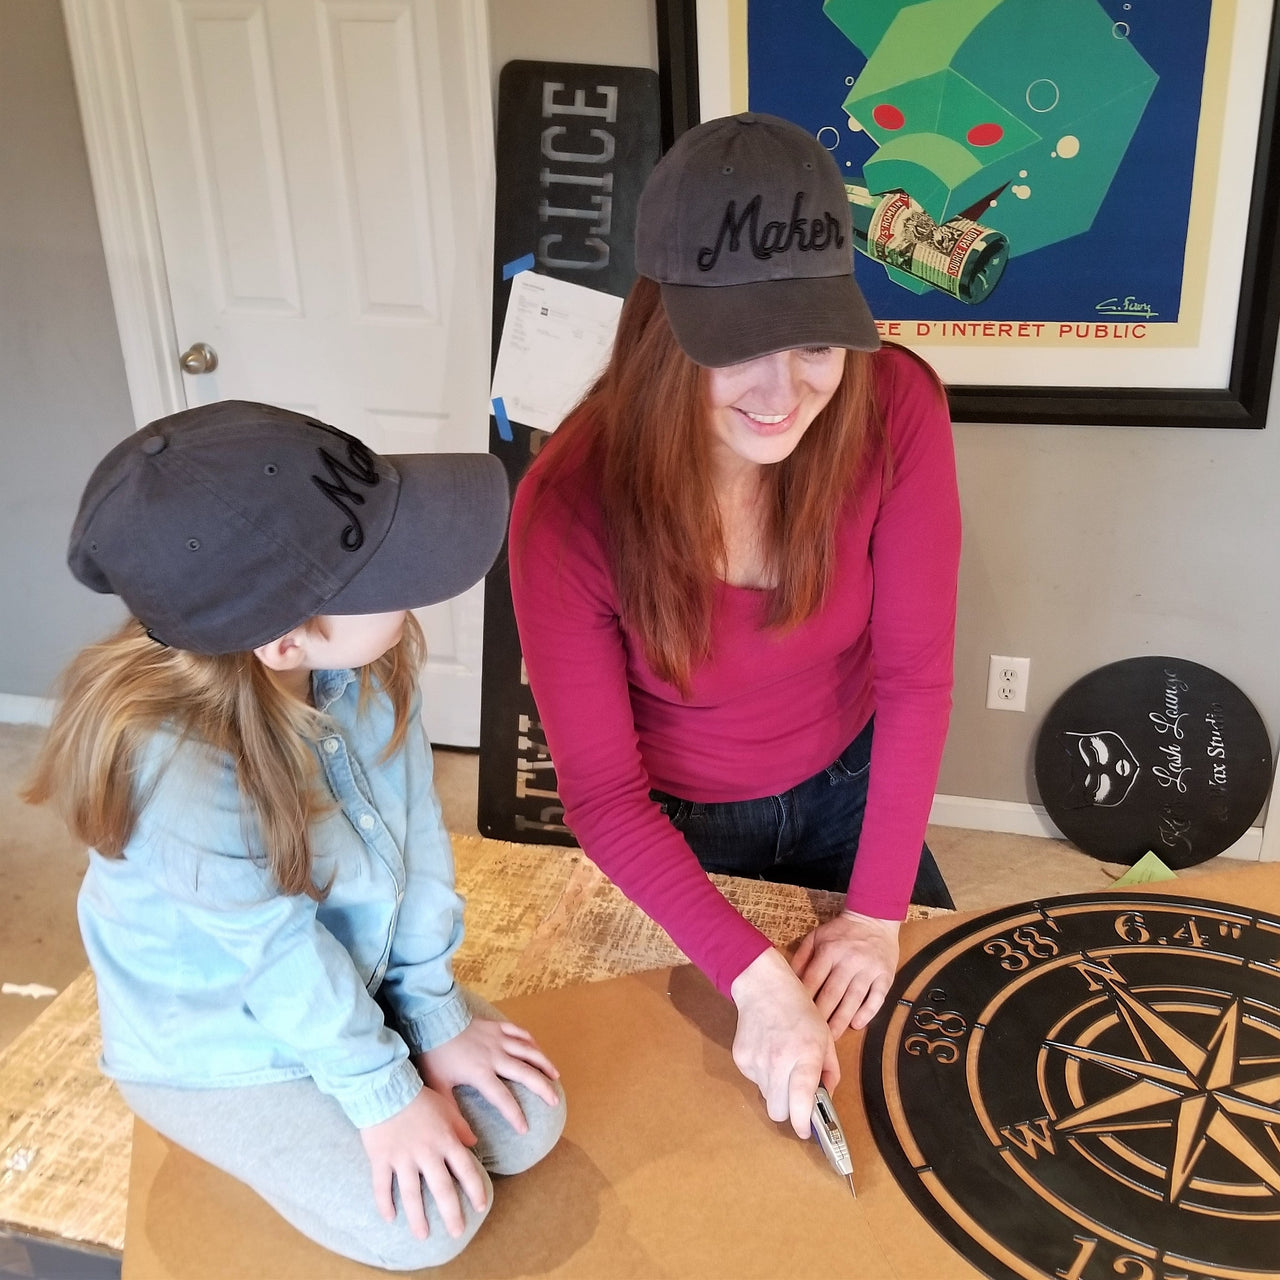 This is an image of one of the owners, Stefanie Heffner, with her daughter preparing a sign for shipment.